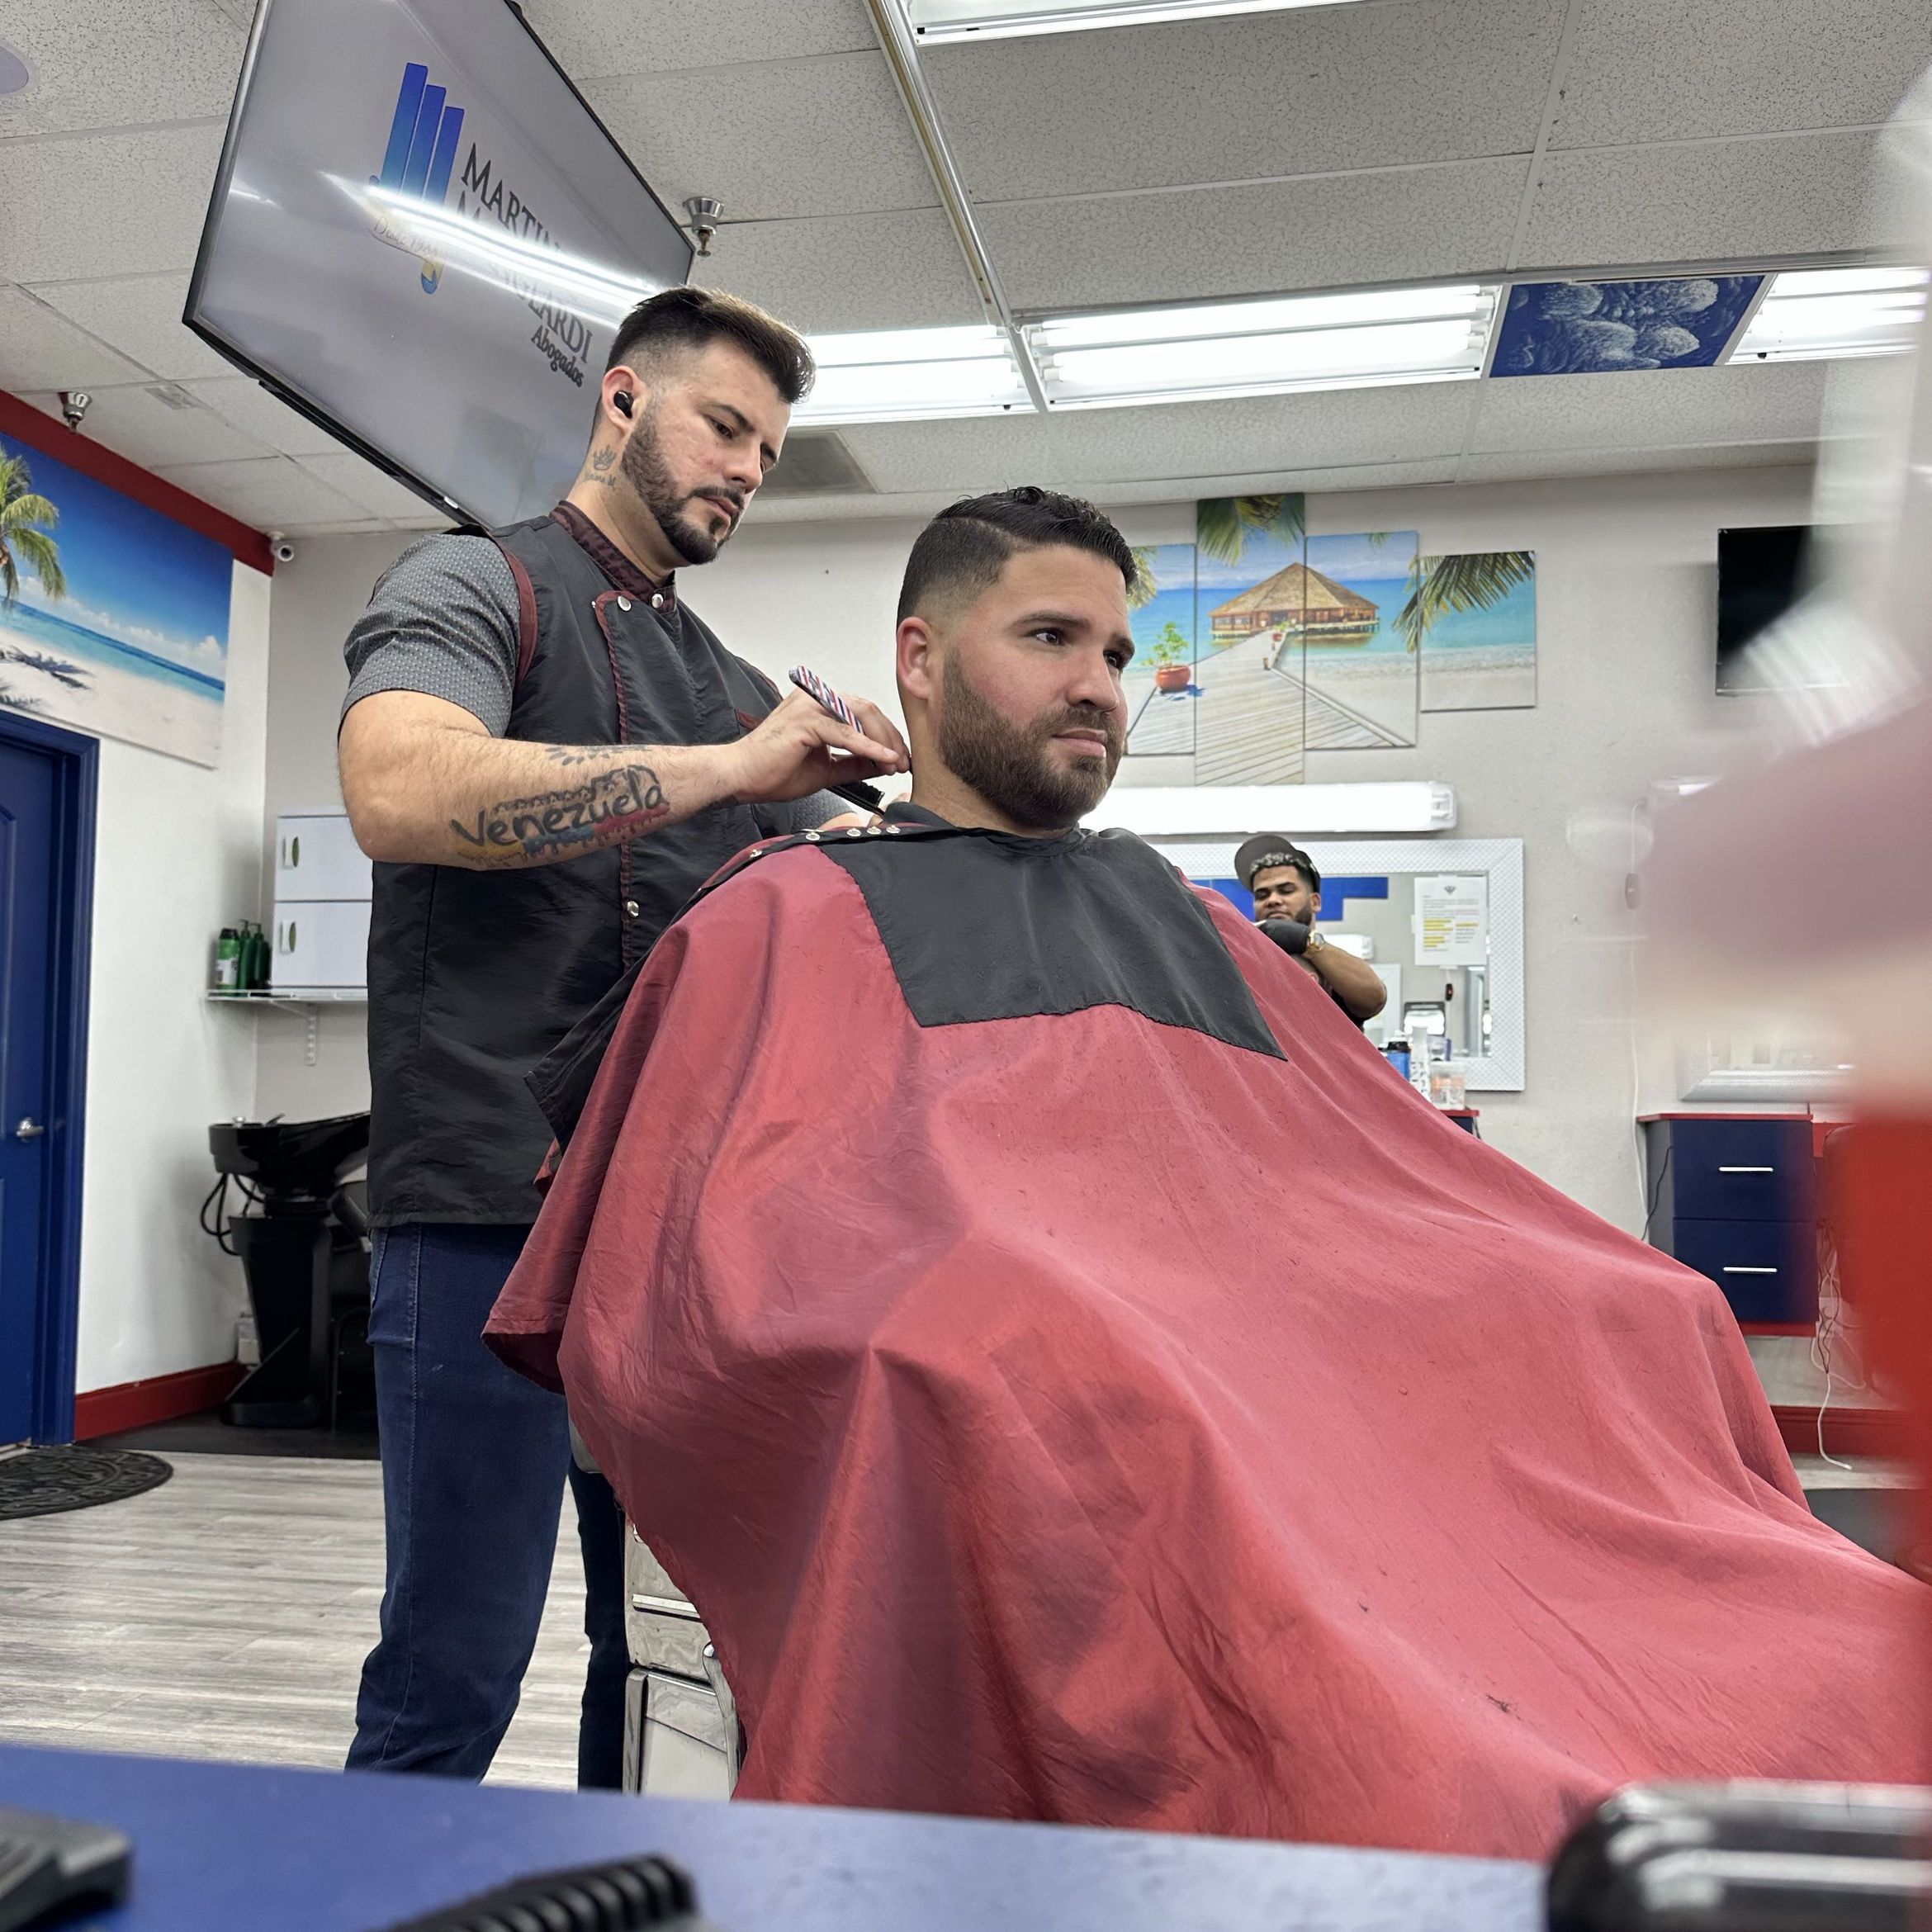 DJR brother barber shop, 2170 S Chickasaw Trail, Orlando, FL 32825, 2170 S Chickasaw Trail, Orlando, FL 32825, +1 (407) 250-6074, Orlando, 32825